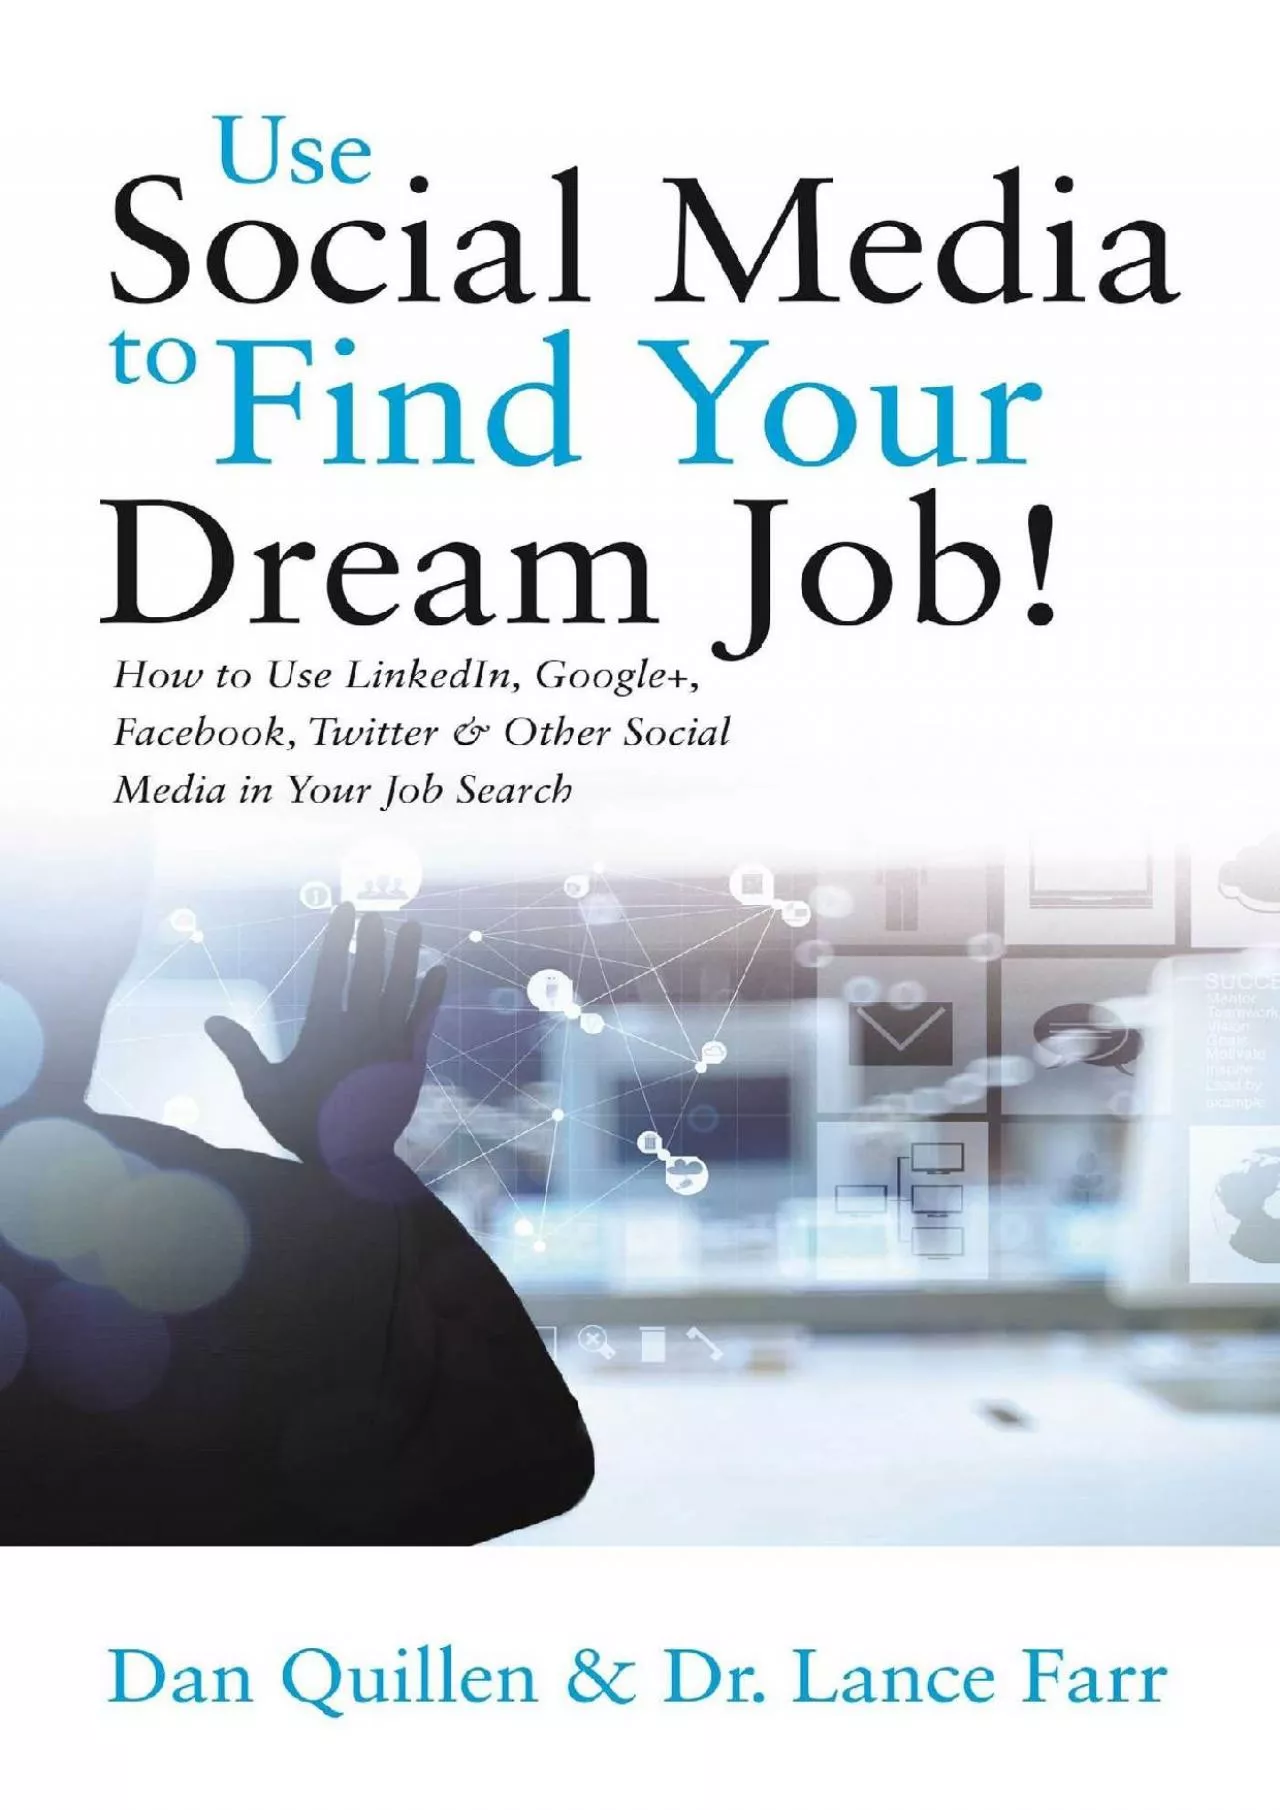 Use Social Media to Find Your Dream Job: How to Use LinkedIn, Google+, Facebook, Twitter